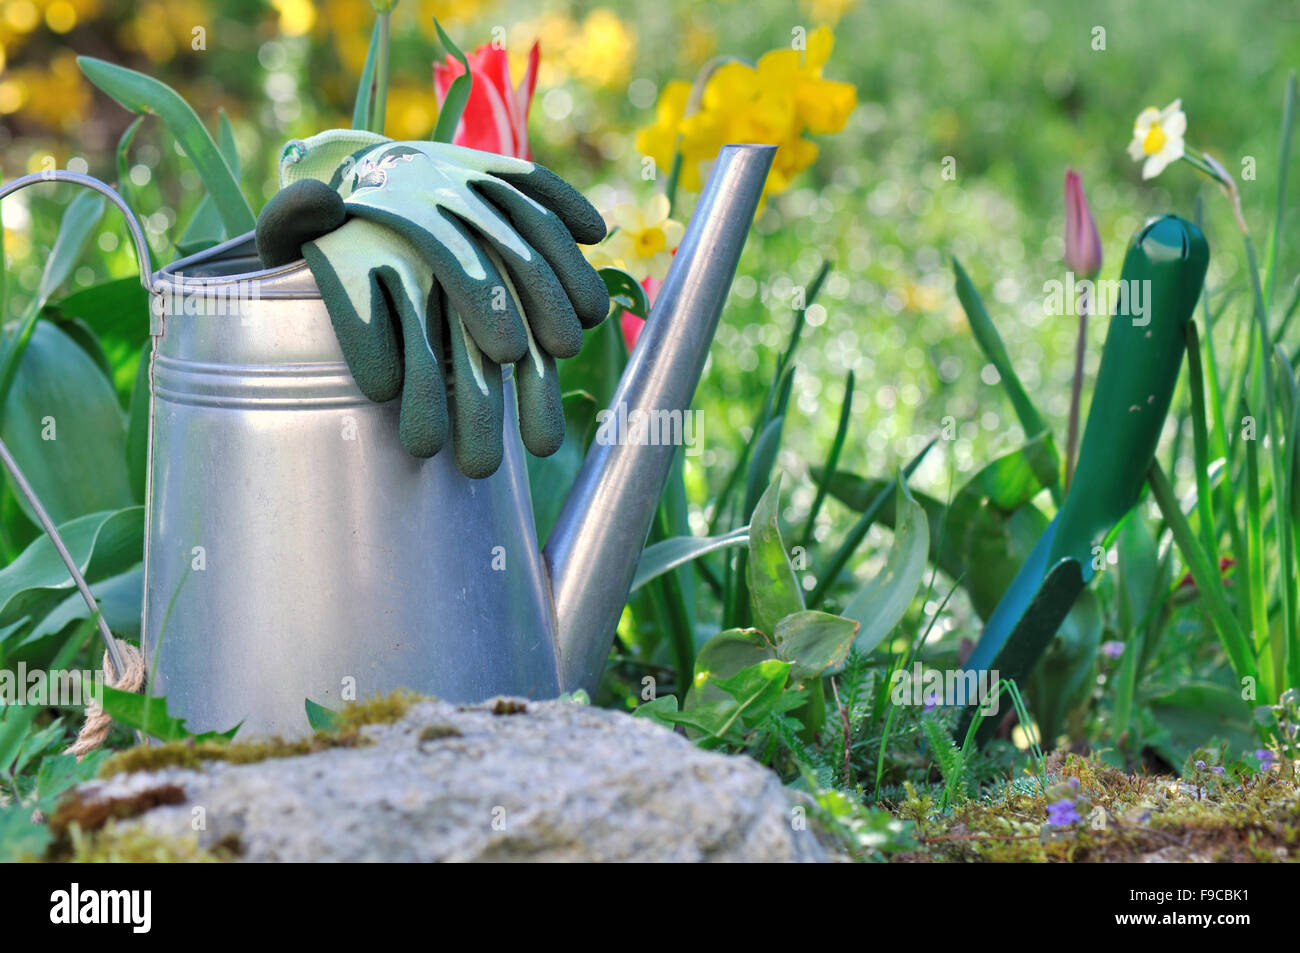 watering can, gloves ant dibble on the ground next to spring flowers Stock Photo